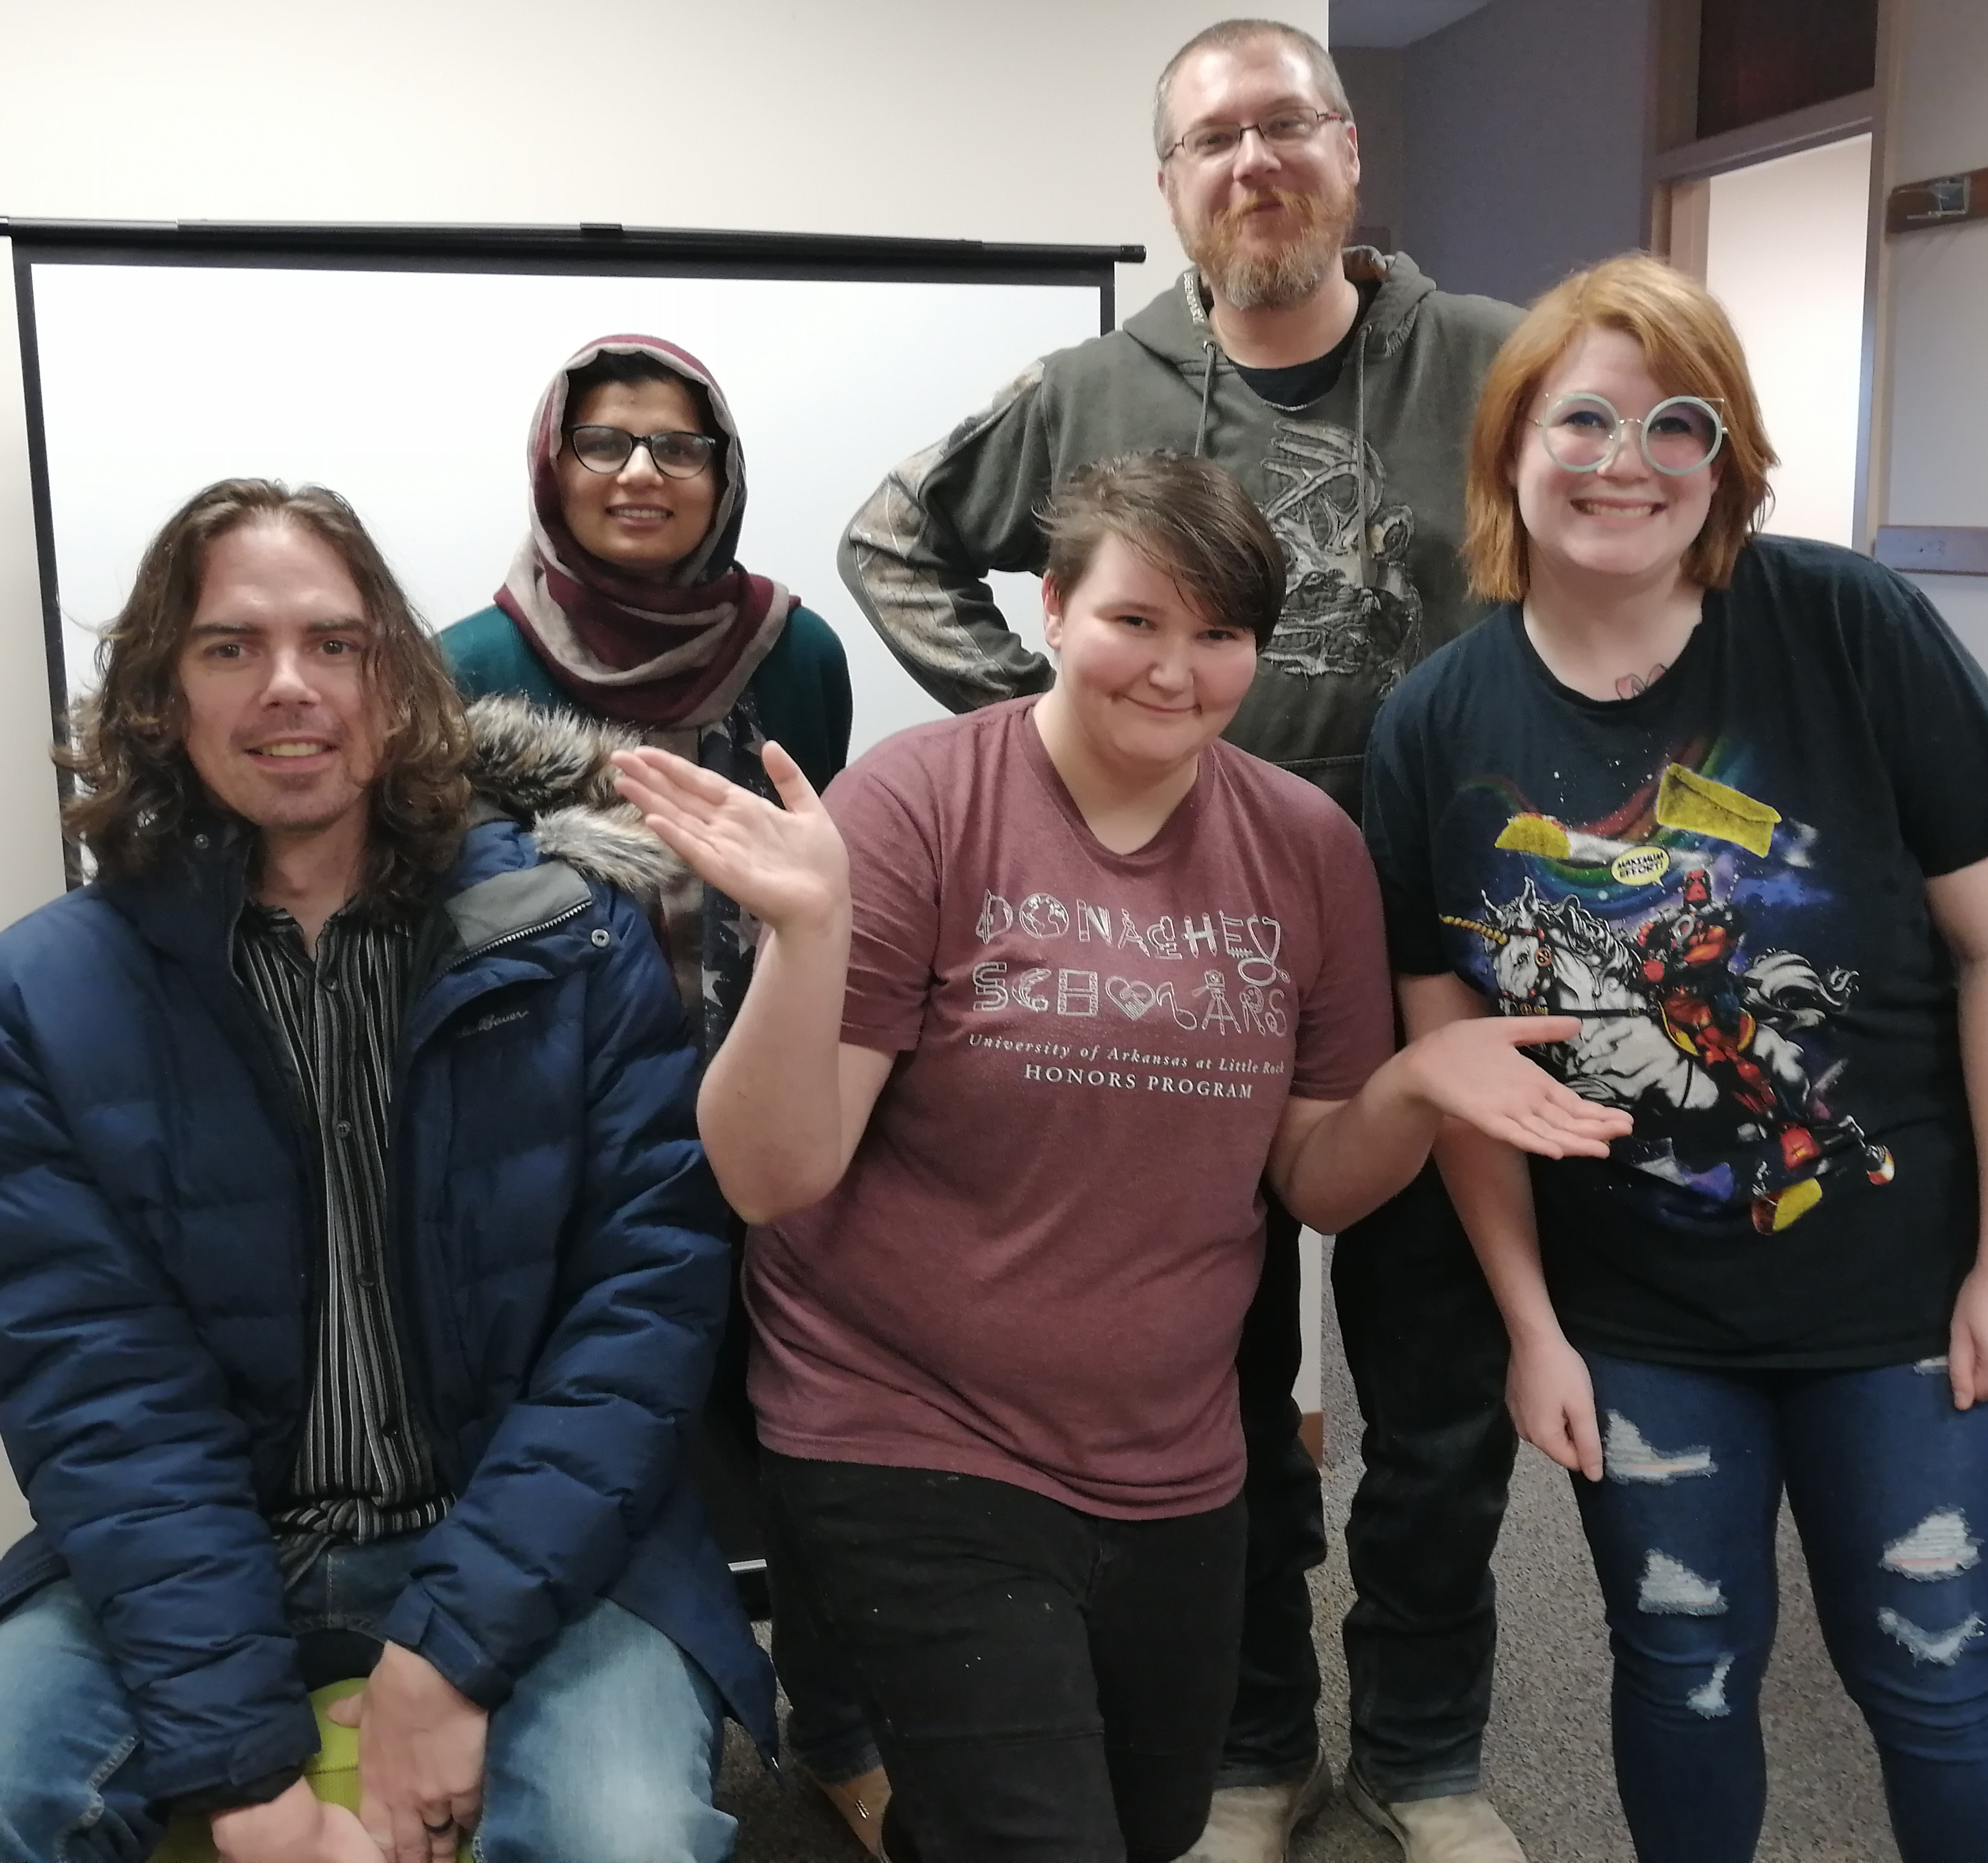 UA Little Rock students participate in Global Game Jam 2020 at the UA Little Rock CRUX Lab. Pictured left to right are Zach Bolt, Bushra Sajid, Emily Hillyard, Travis Bailey, and Loren Snow.